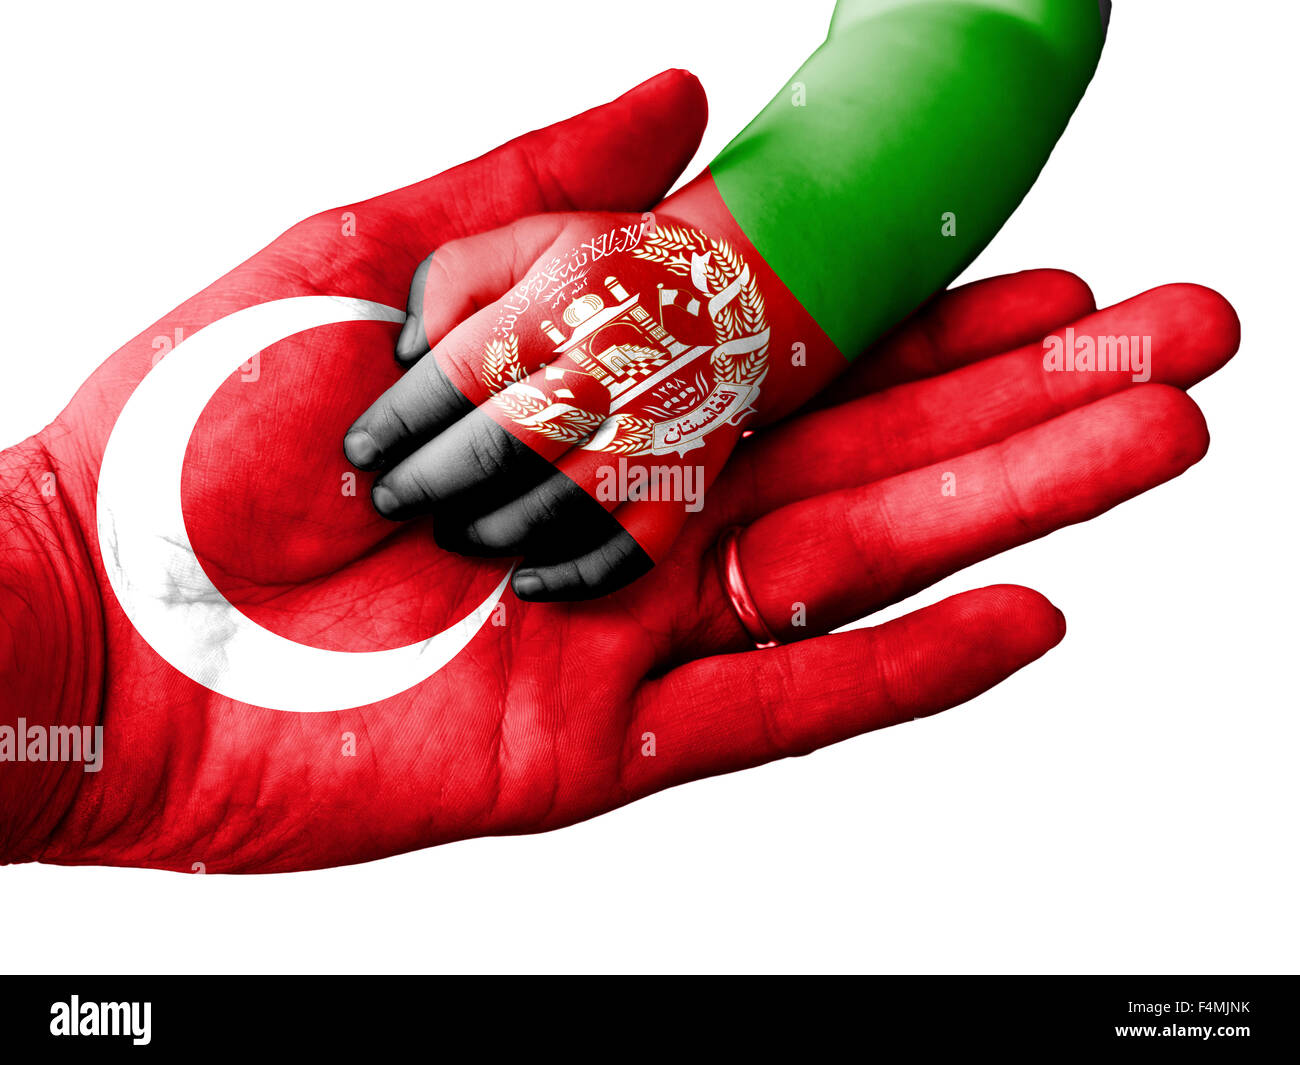 Flag of Turkey overlaid the hand of an adult man holding a baby hand with the flag of Afghanistan overprinted Stock Photo